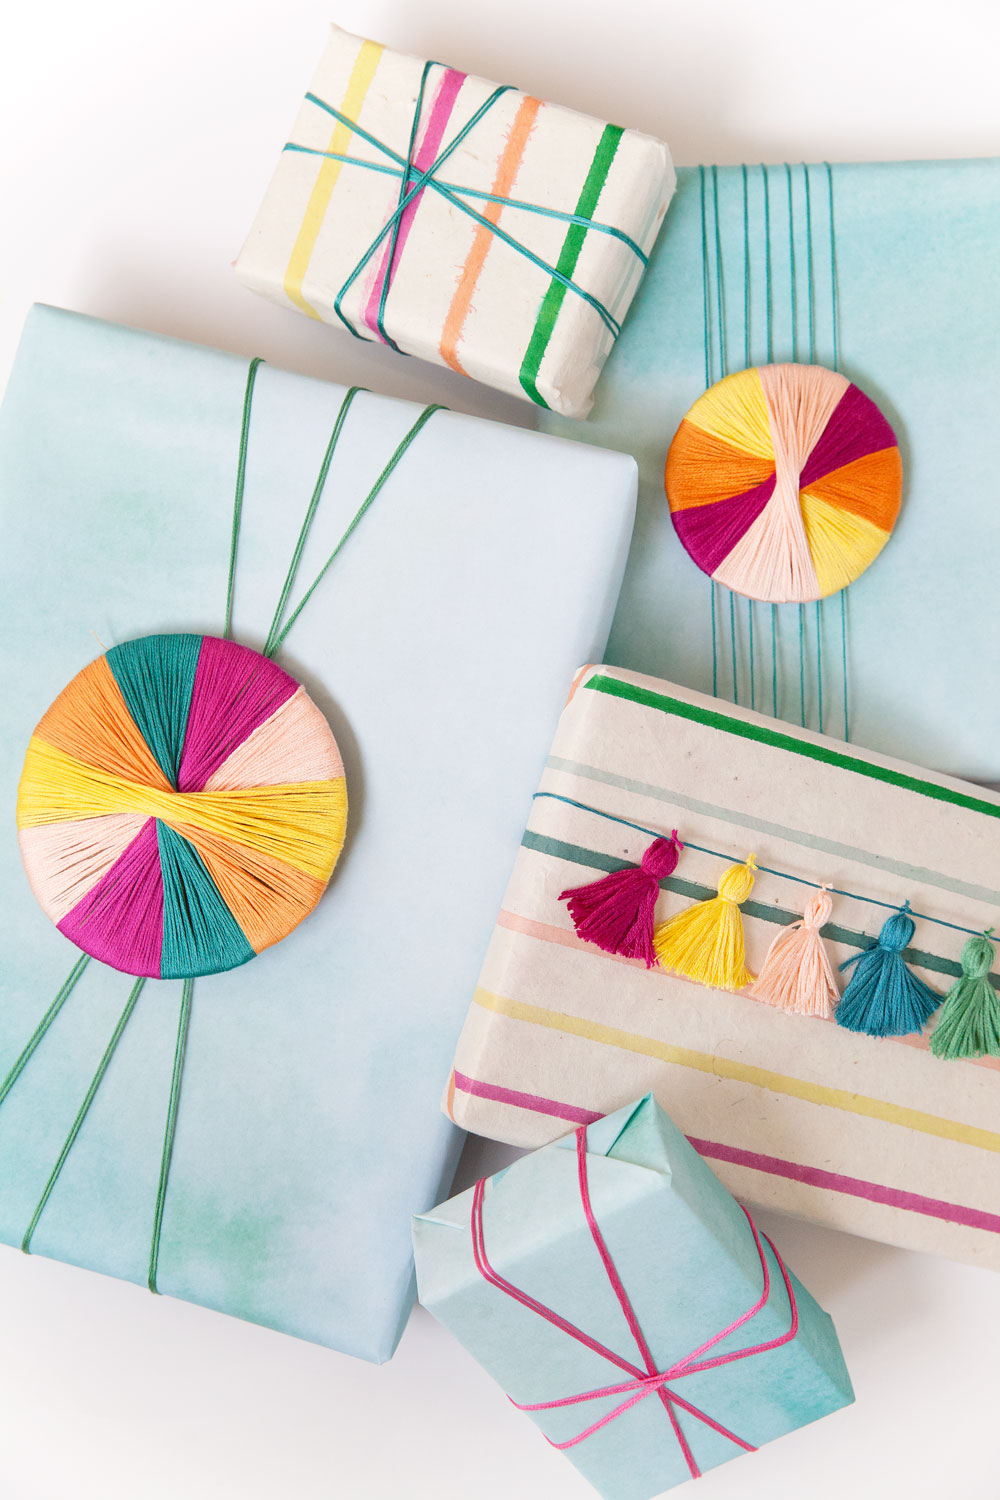 3 fun ways to wrap up gifts using embroidery floss. Gift wrap DIY